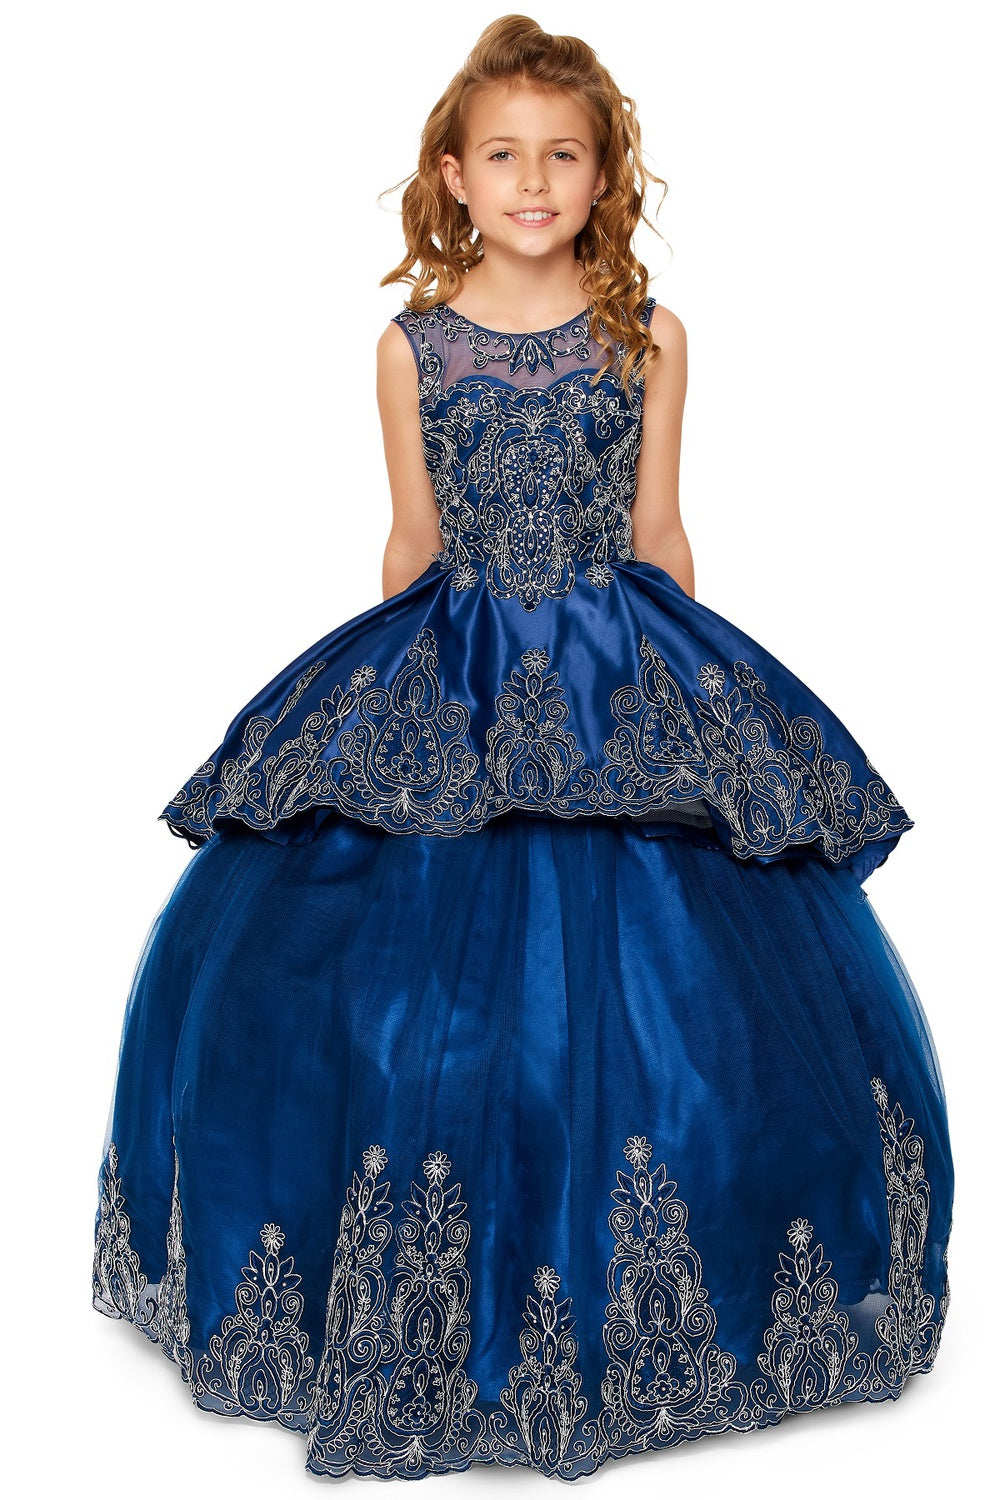 Elegant Breathtaking Metallic Coiled Embroidered Stone Quinceanera Kids Dress CU8018 Elsy Style Kids Dress